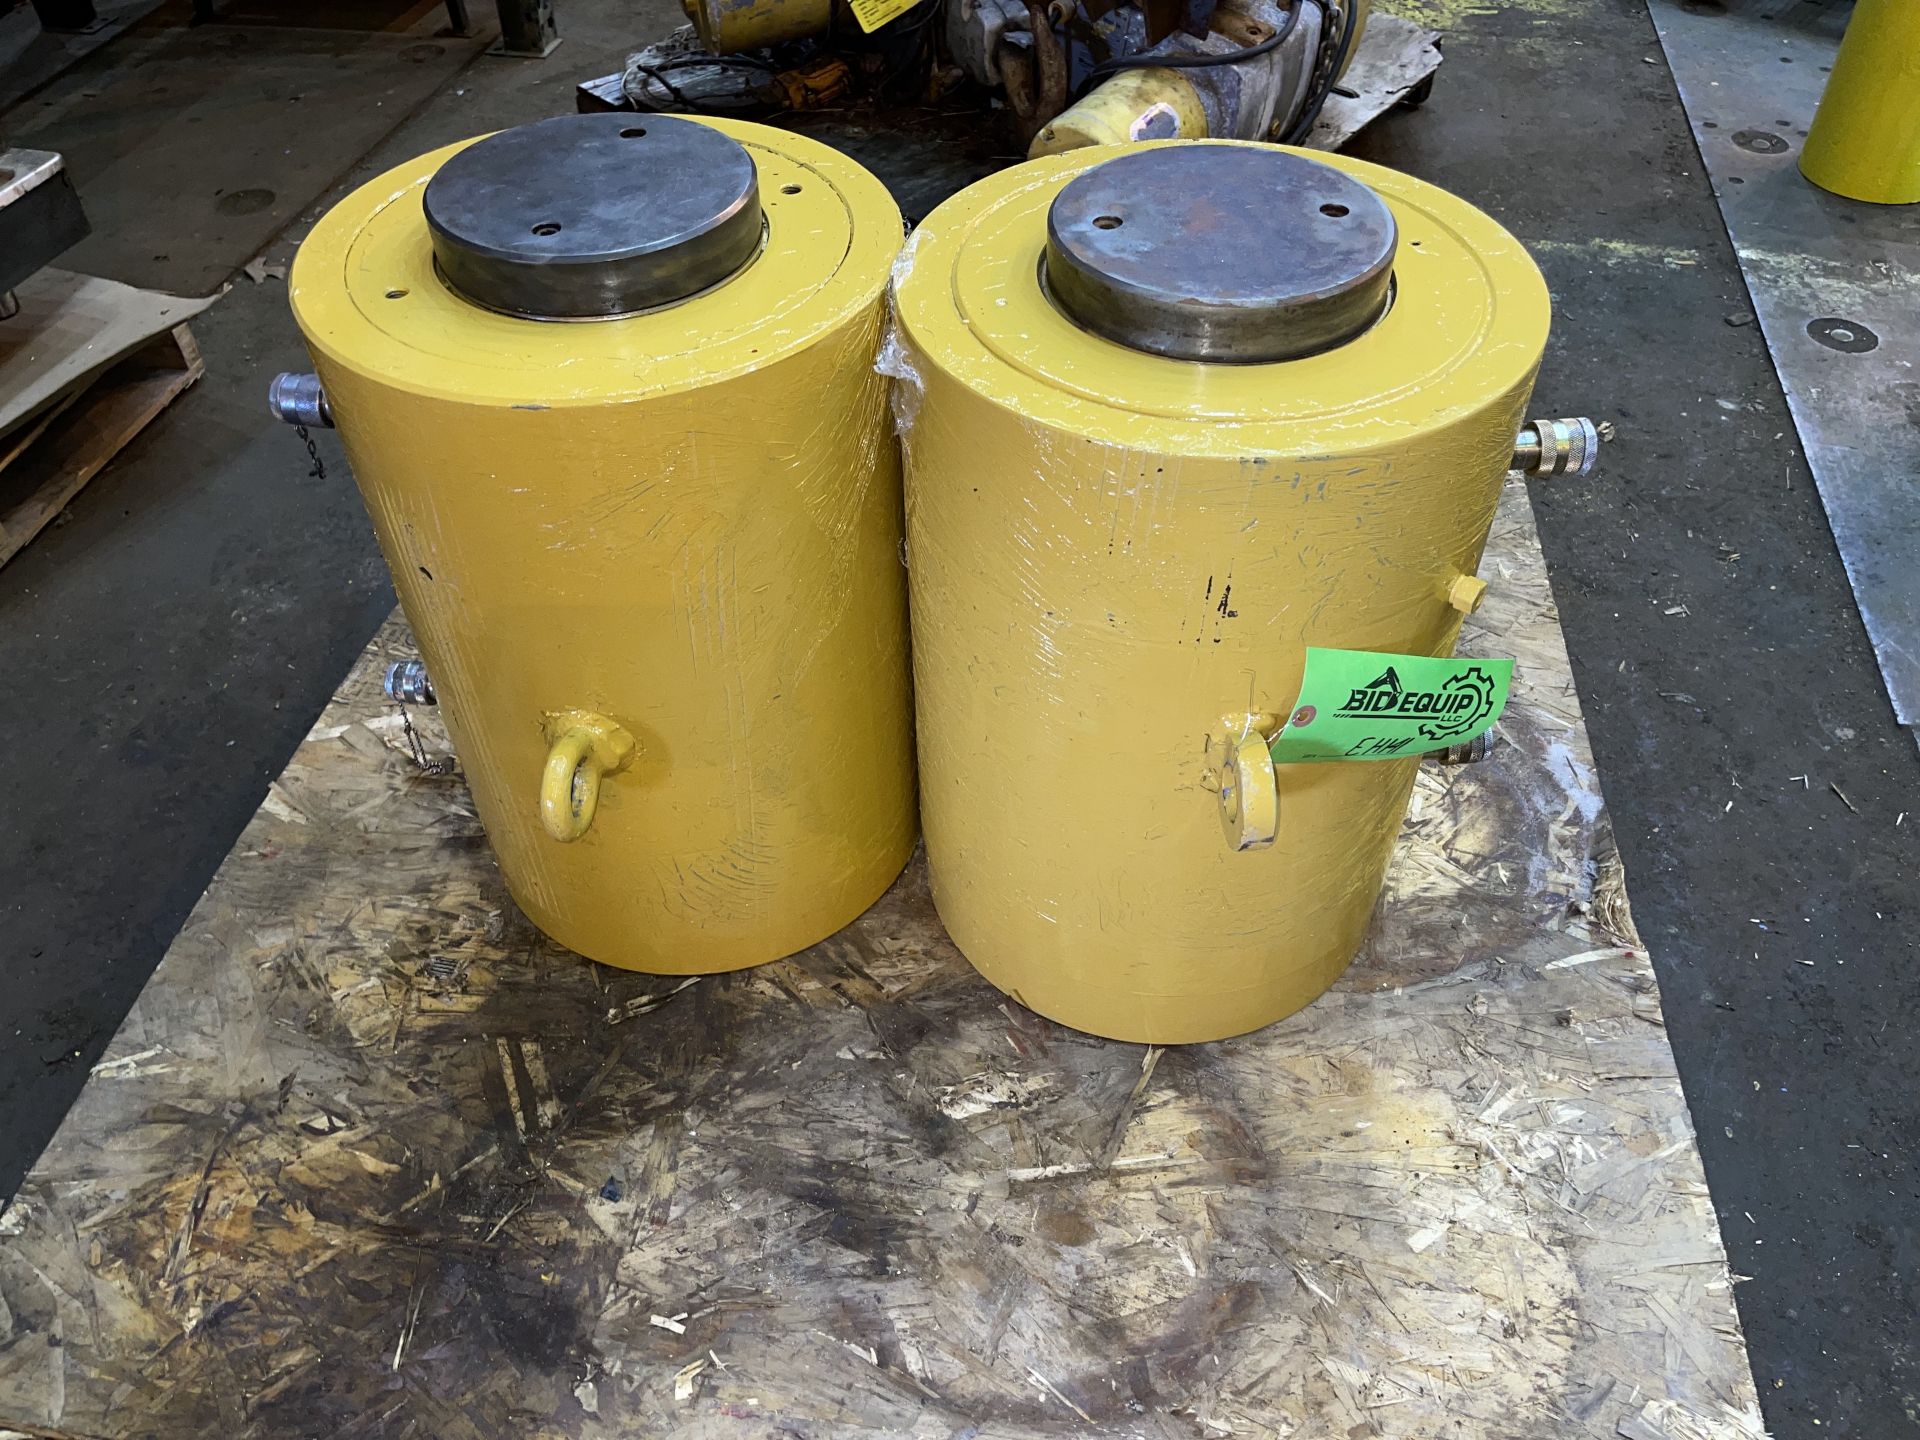 Lot of 2 400 Ton Hydraulic Jacks (EH141) - Lester, PA - Image 3 of 4